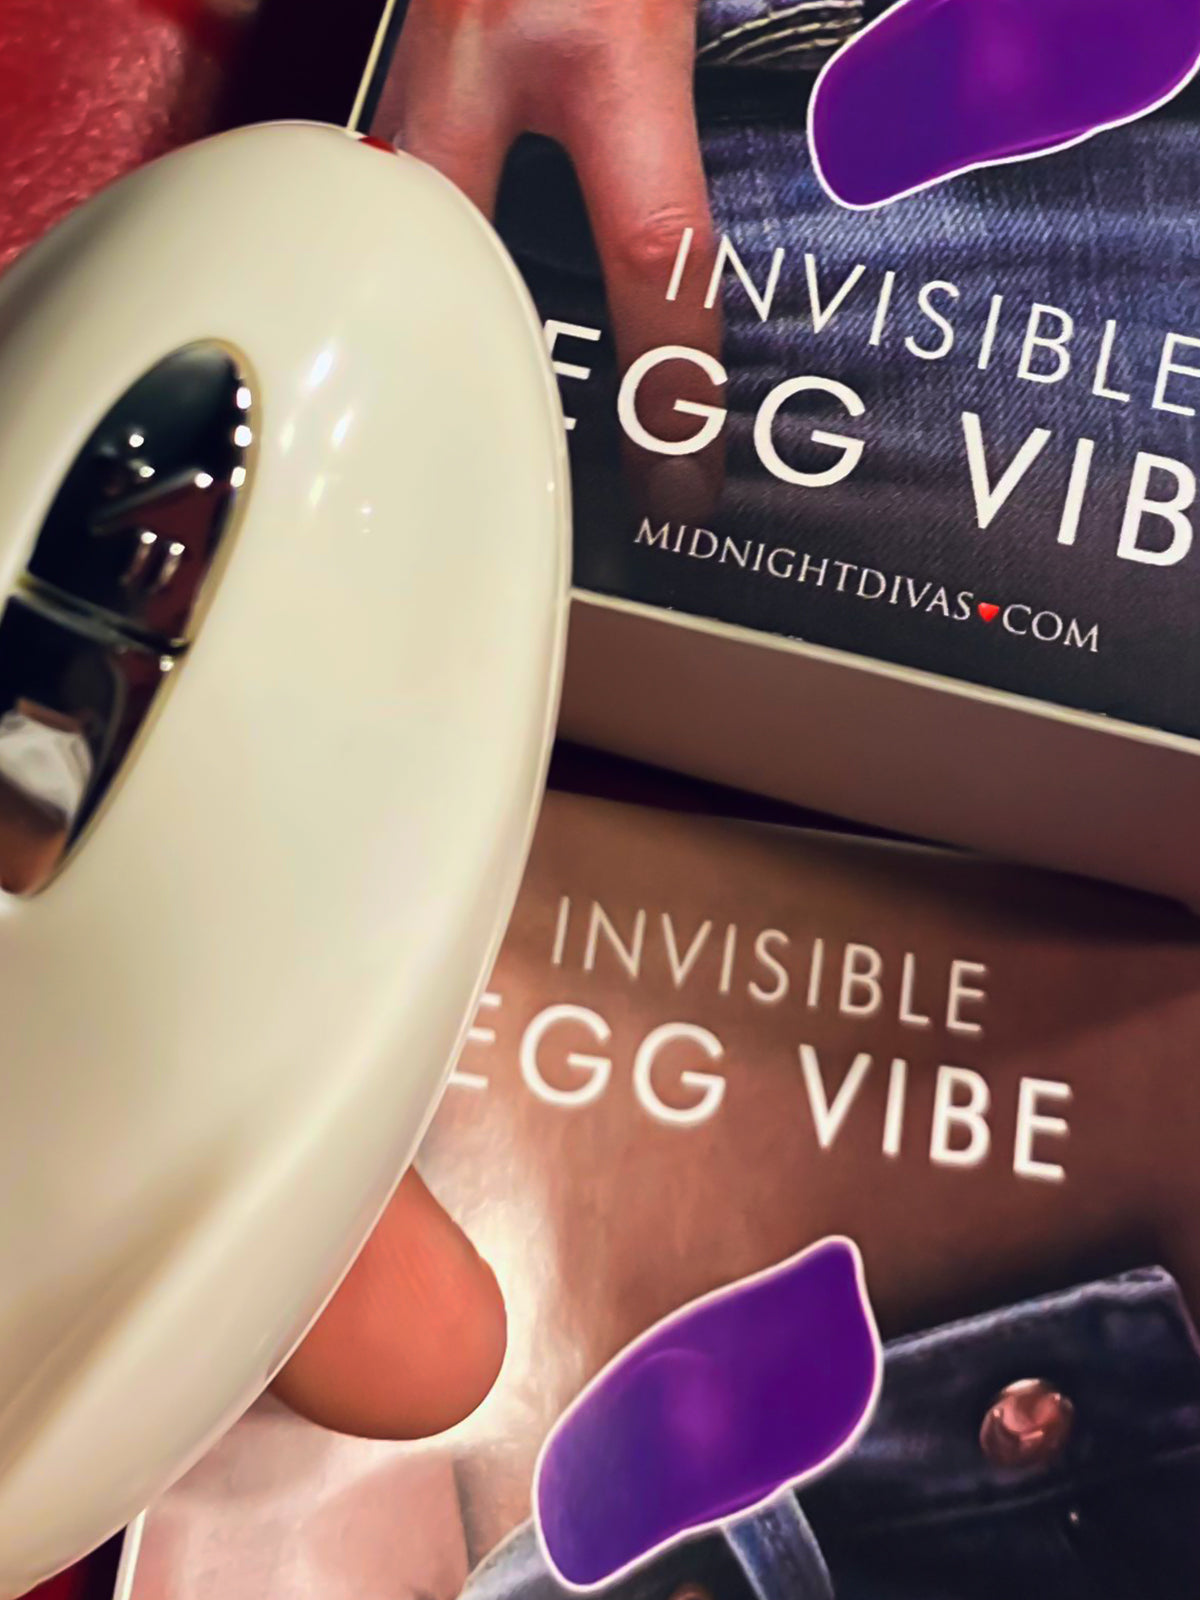 Invisible Egg Vibe